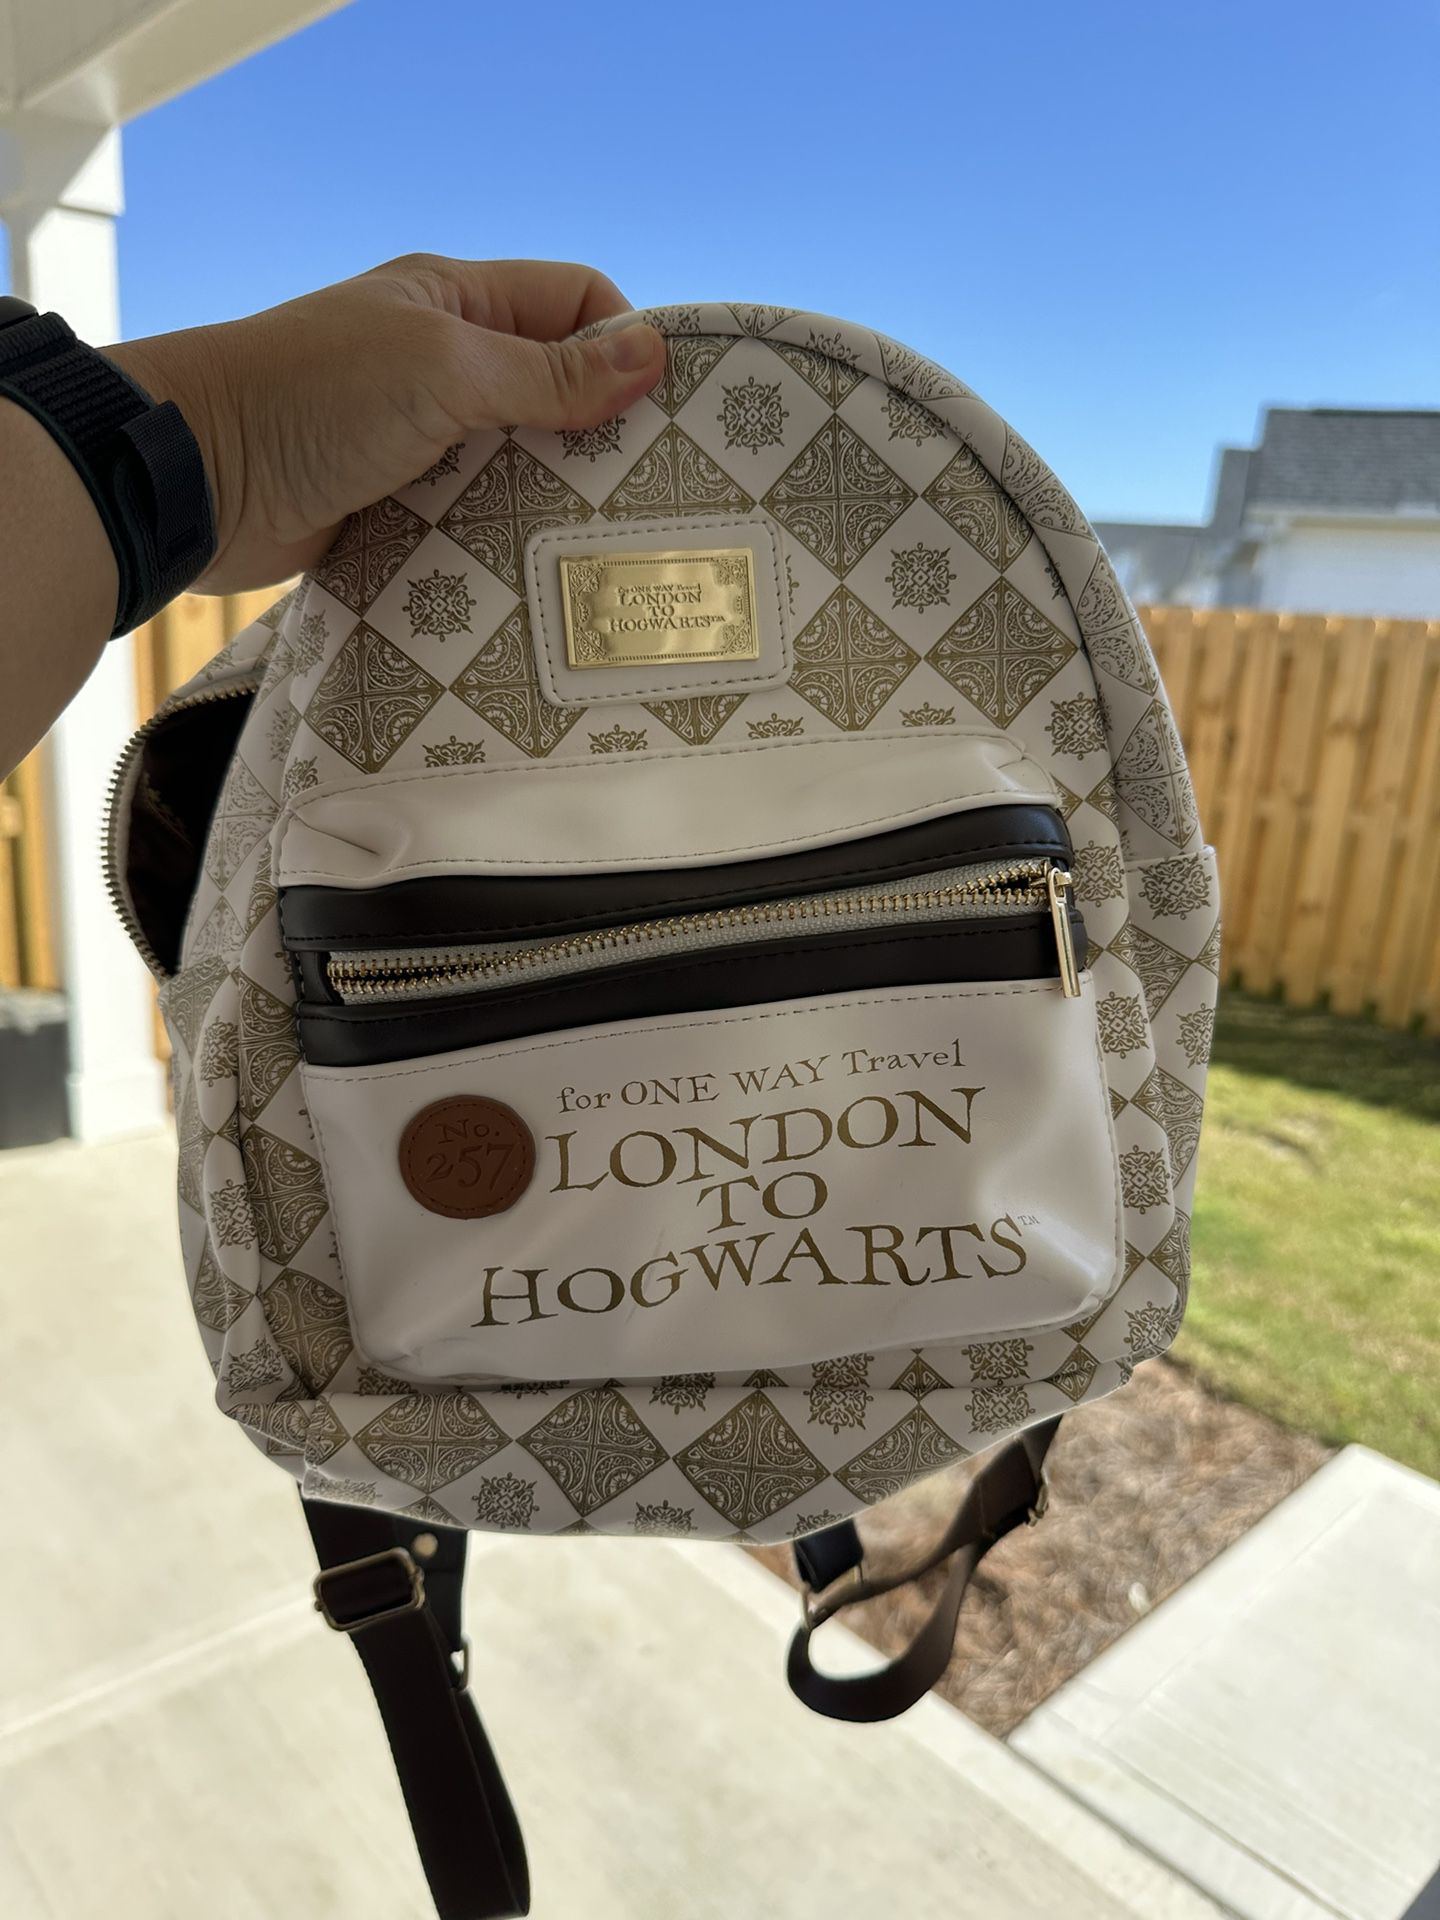  Hogwarts™ Express Ticket Mini Backpack (Official Universal Park Version - Never Used)